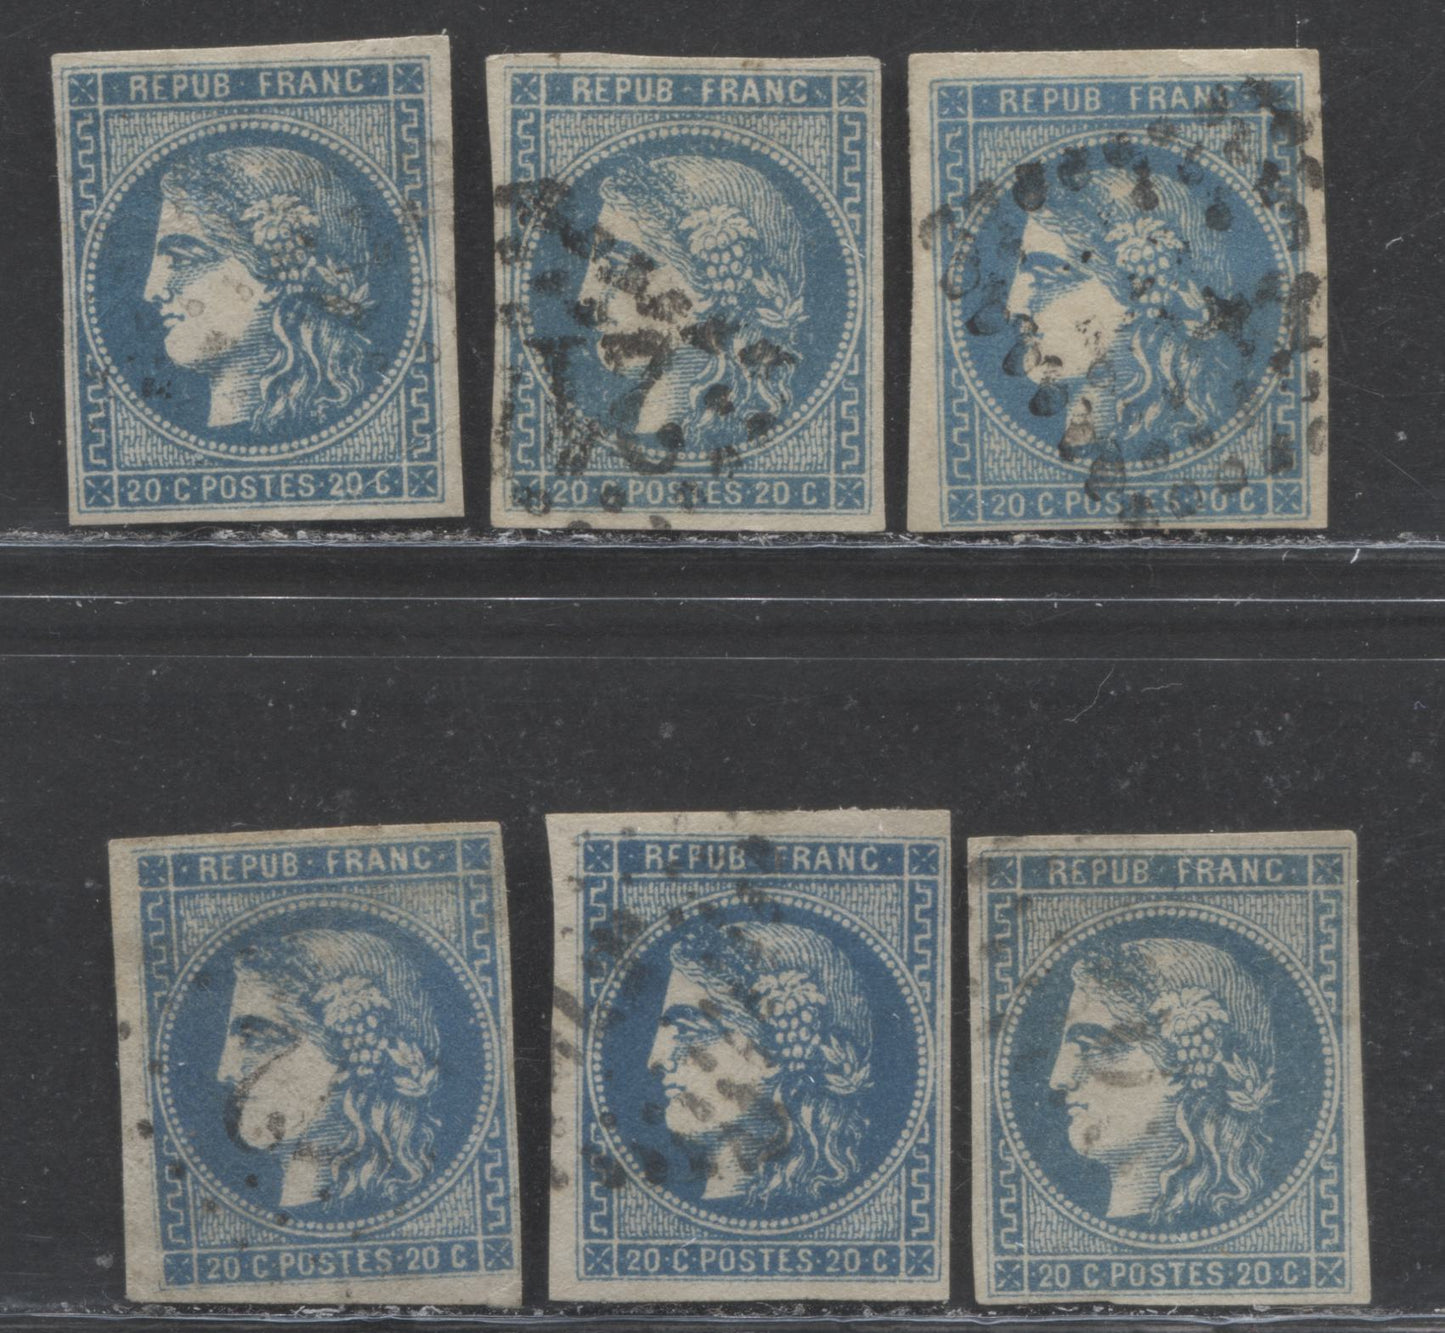 Lot 383 France SC#45 20c Blue, Type 3 1870-1871 Imperf Bordeaux Definitive Issue, Six Fine Used Examples, Different Papers, Shades and Cancels, 2022 Scott Classic Cat. $96 USD, Net. Est. $50, Click on Listing to See ALL Pictures